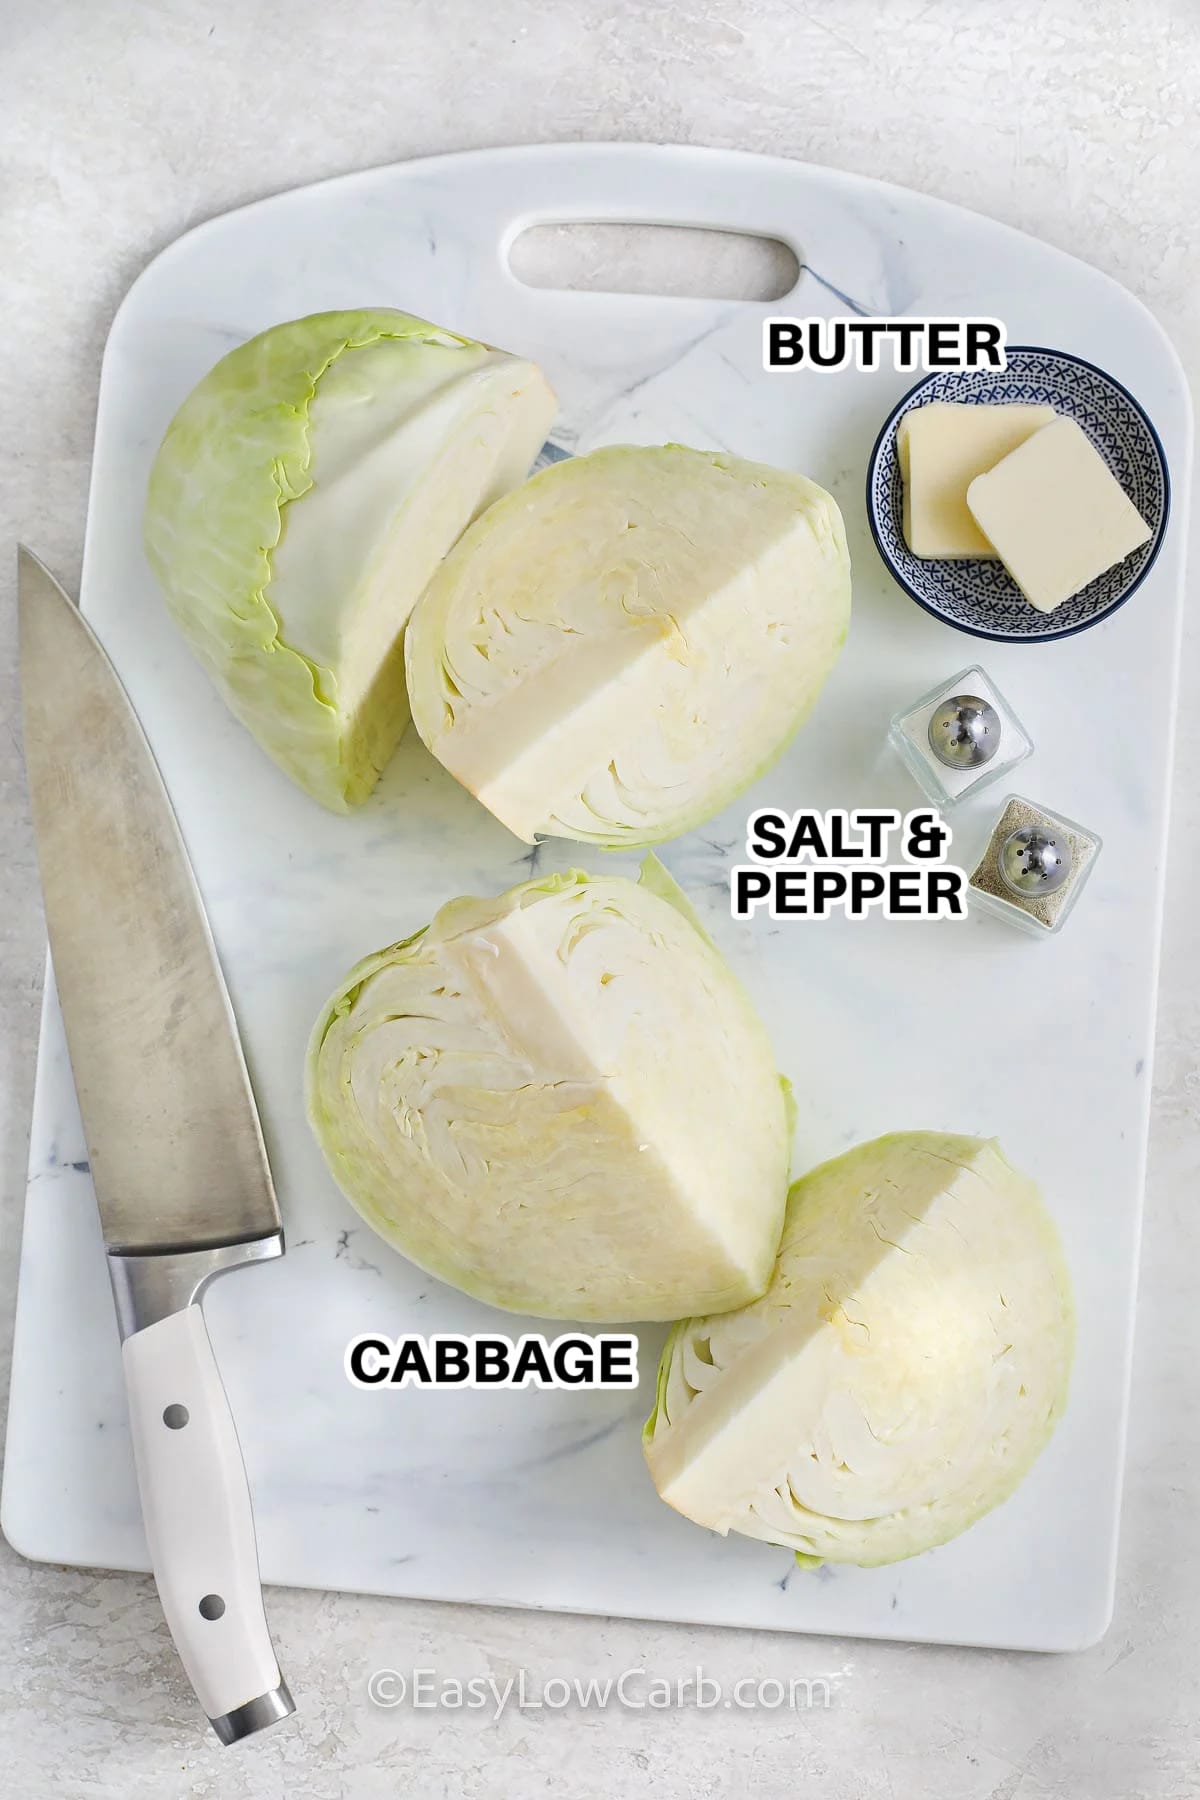 ingredients to make Boiled Cabbage labelled: Cabbage, Butter, Salt, and Pepper